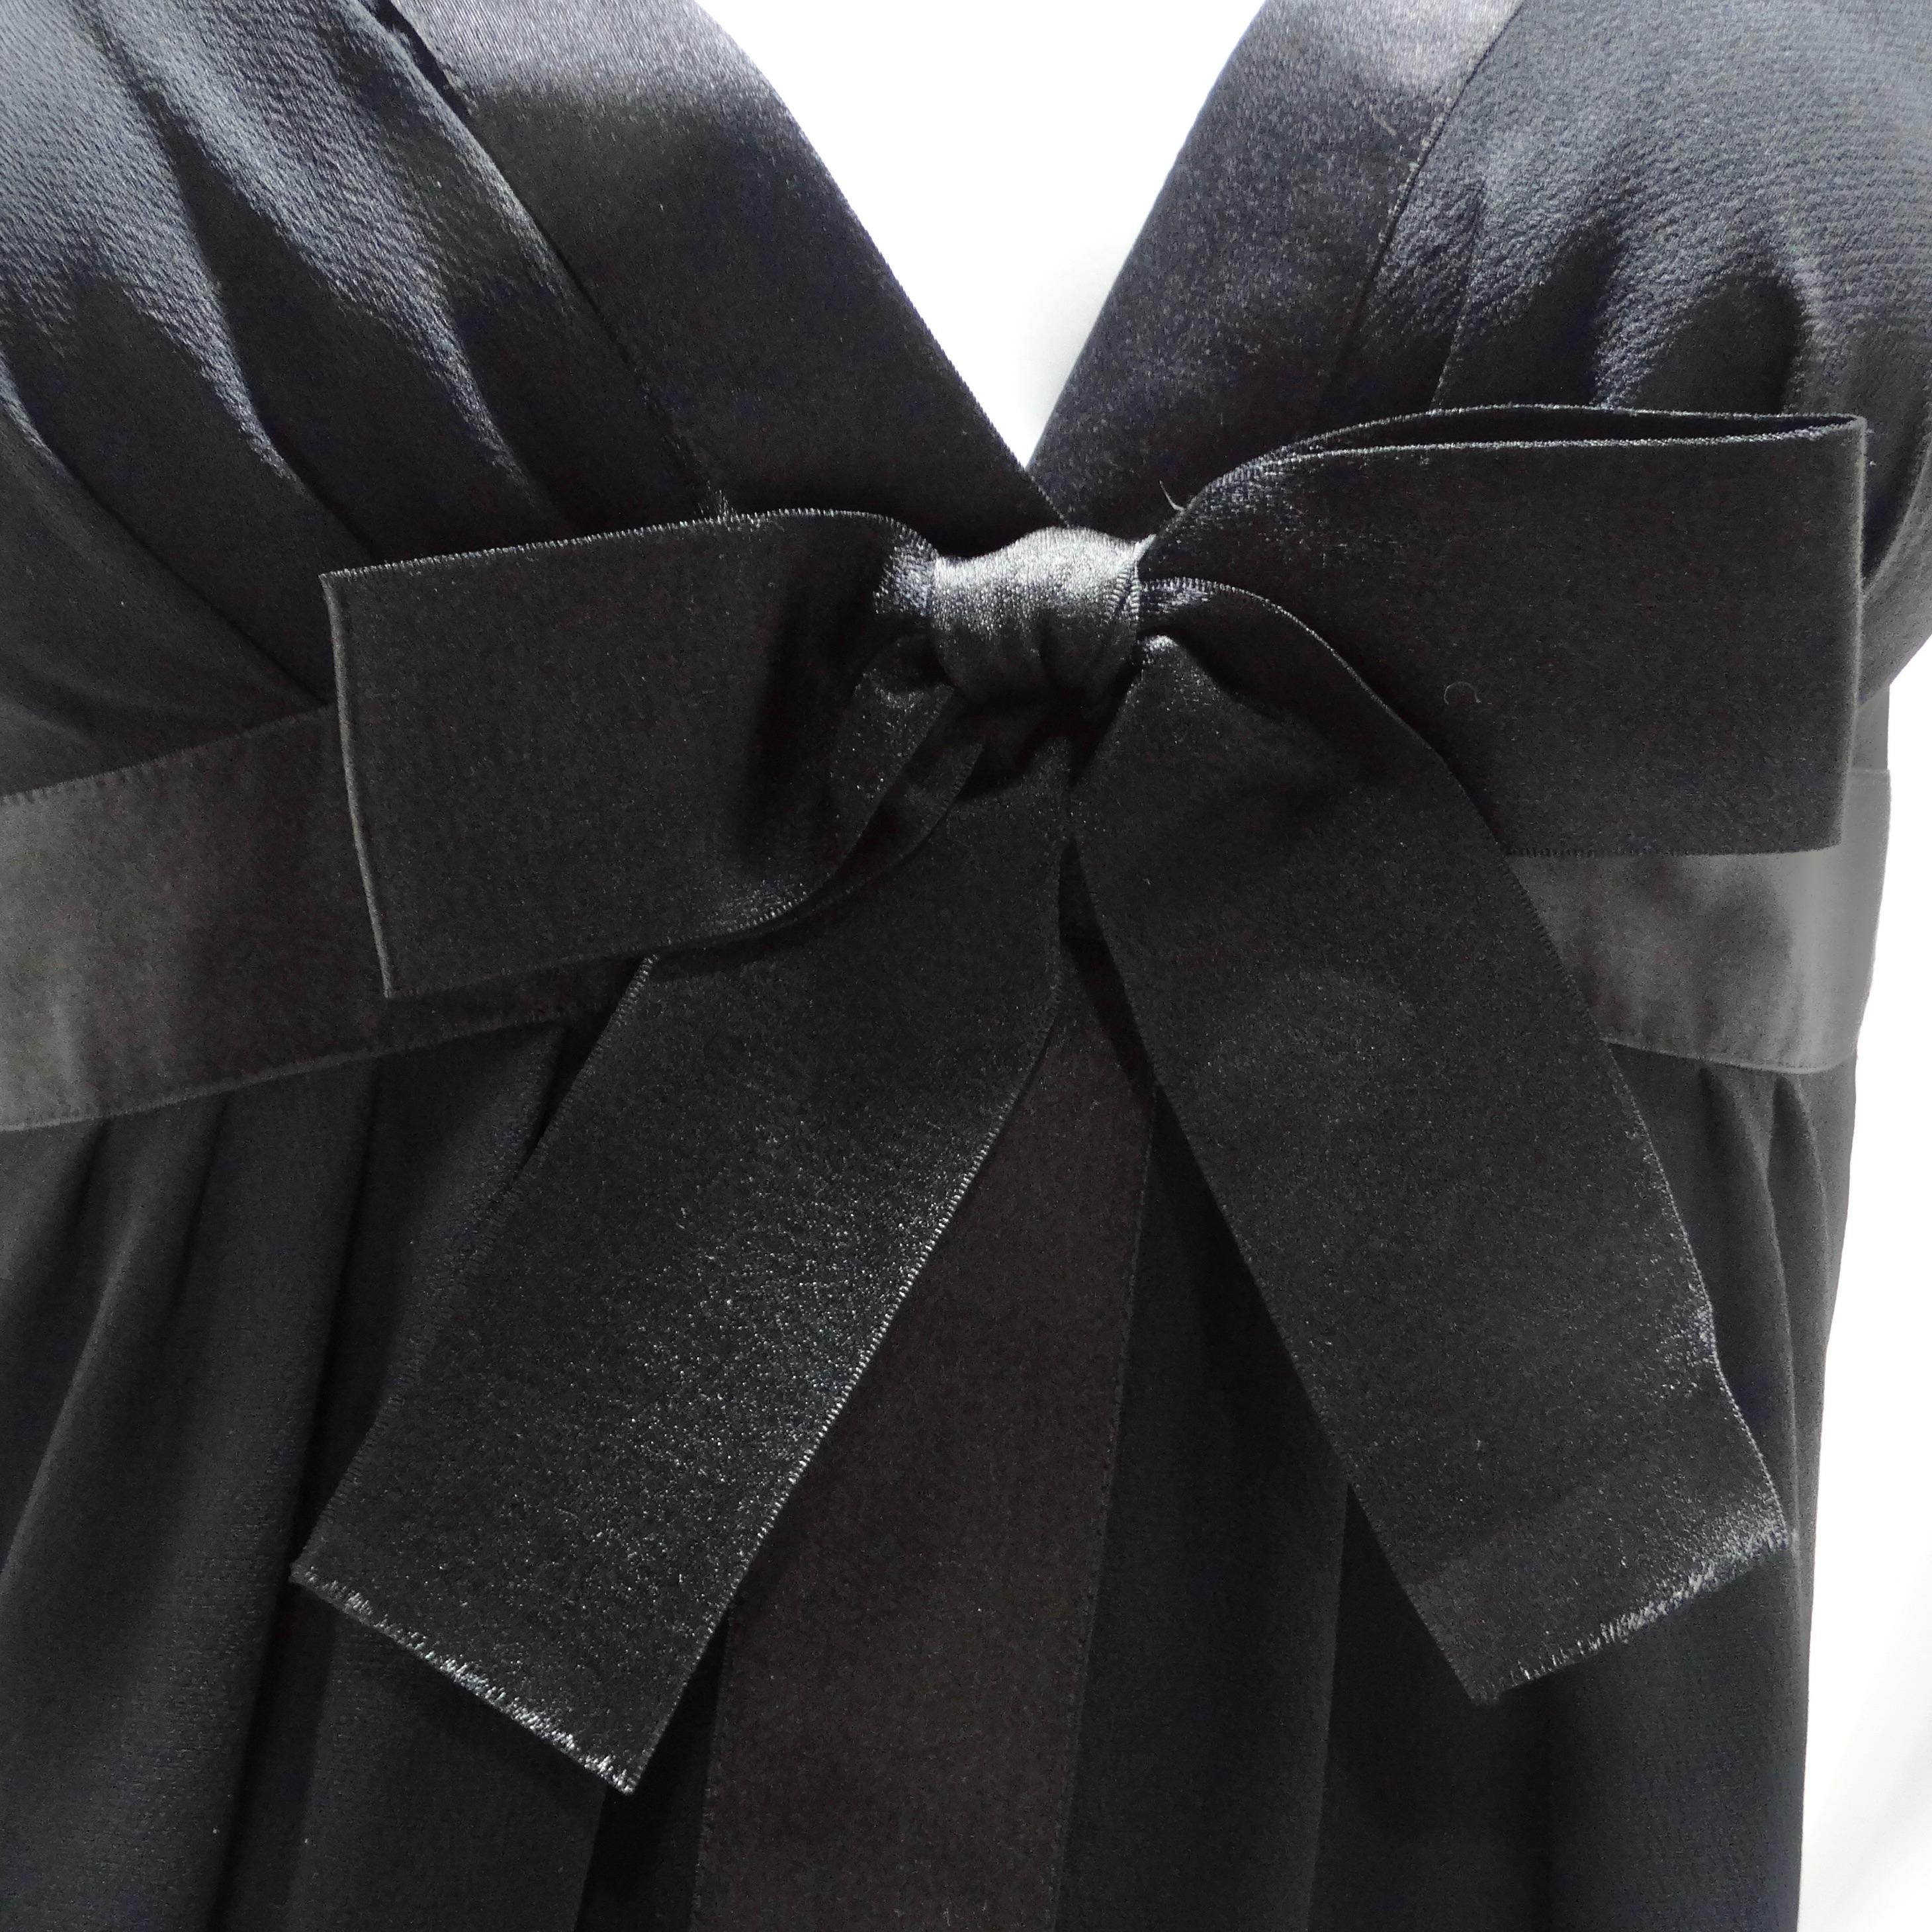 Chanel 1990s Silk Bow Motif Little Black Dress In Excellent Condition For Sale In Scottsdale, AZ